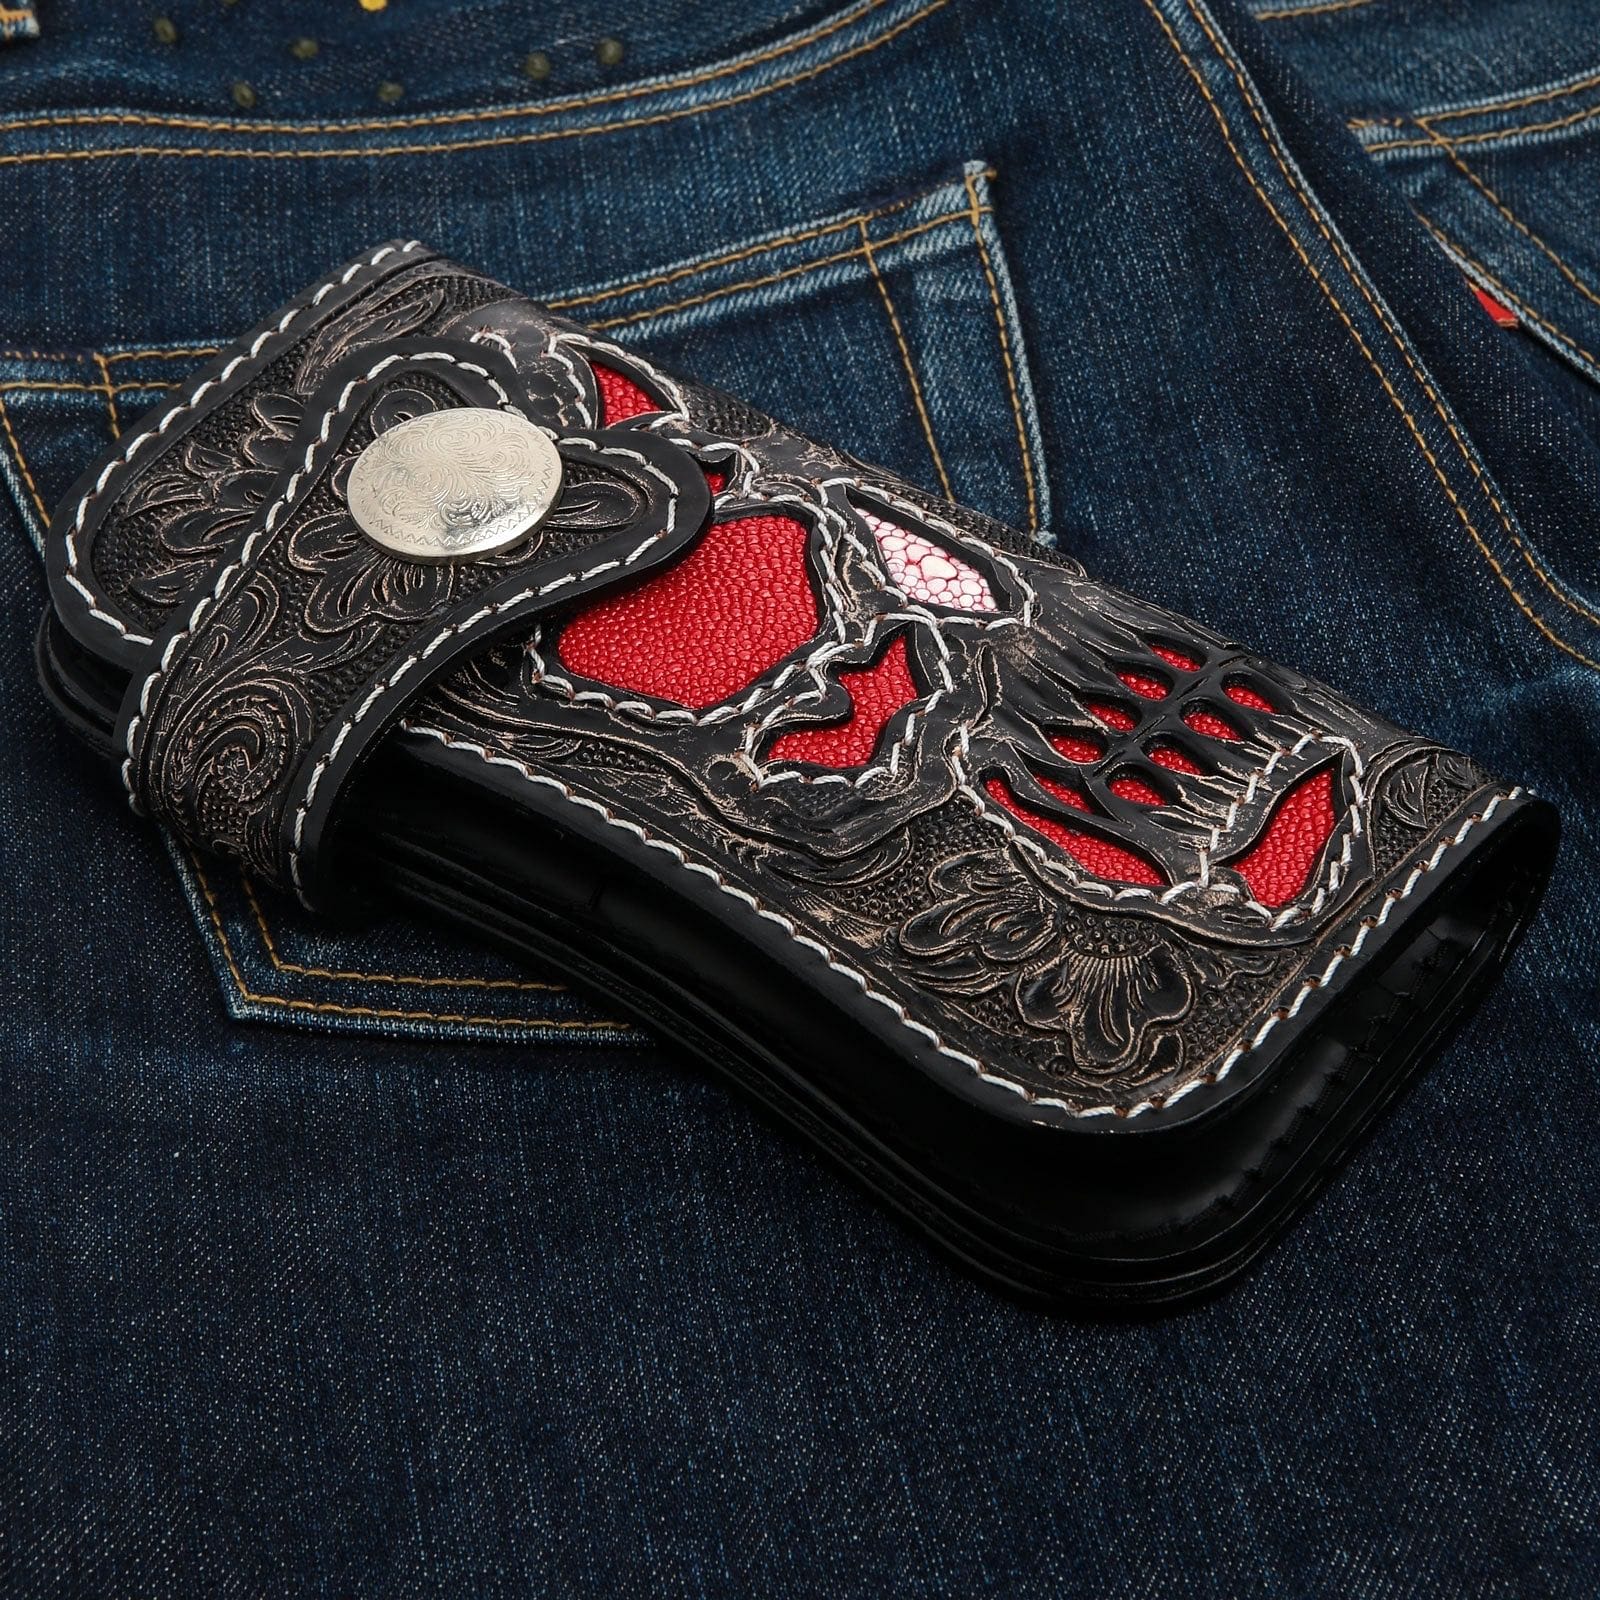 Custom Hand Tooled and Painted Genuine Leather Wallet- Personalized